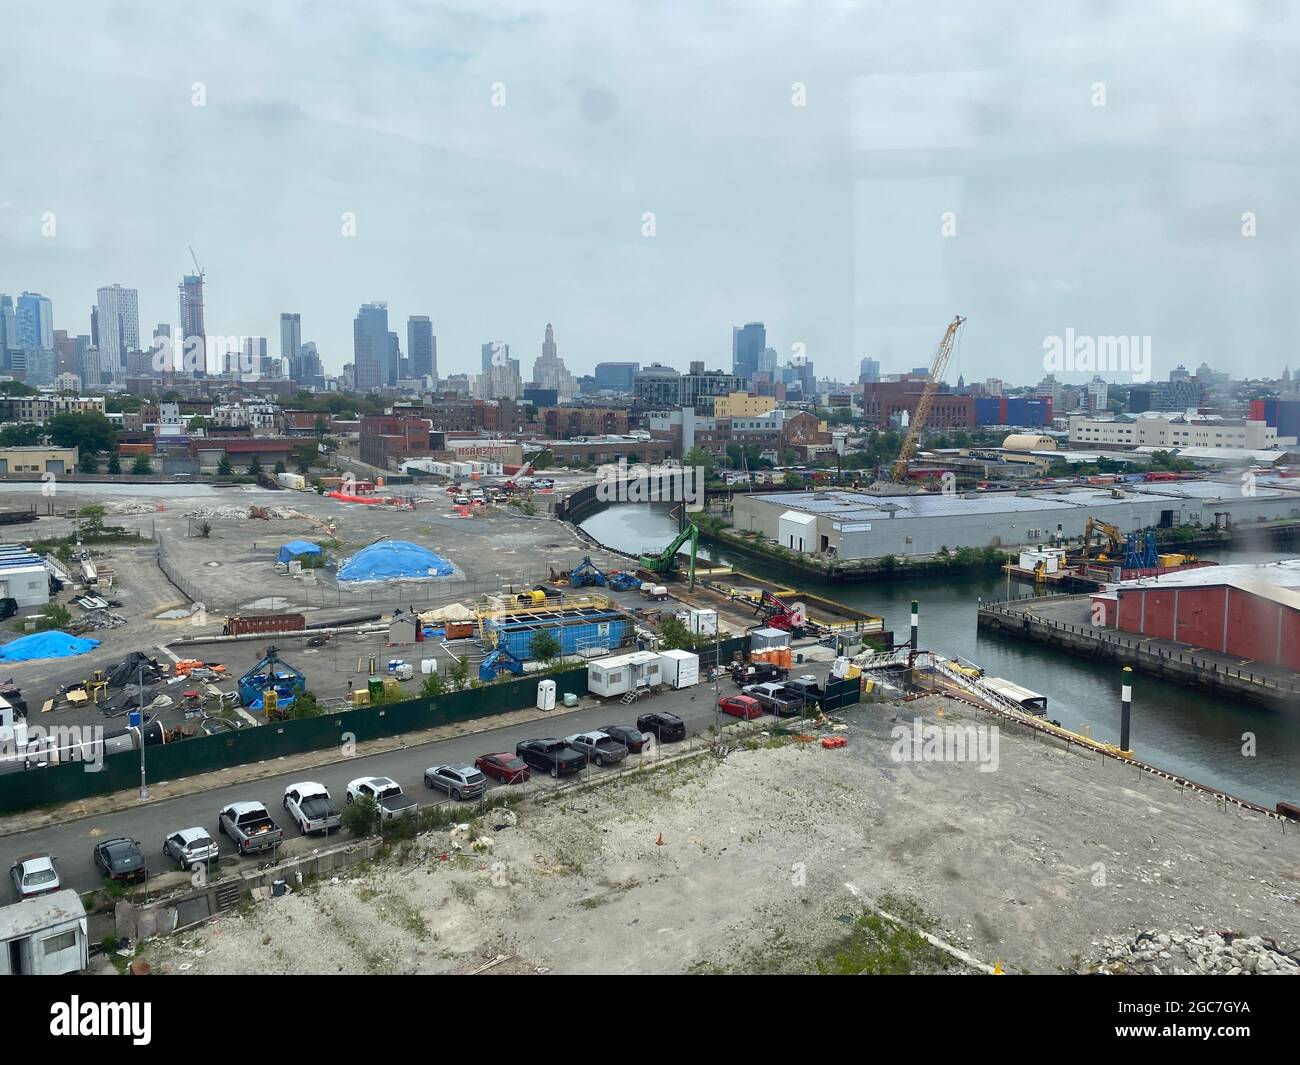 Fitness mirakel Rejsebureau Looking at the Gowanus industrial area surrounding the notorious polluted  Gowanus Canal superfund site in Brooklyn, New York Stock Photo - Alamy